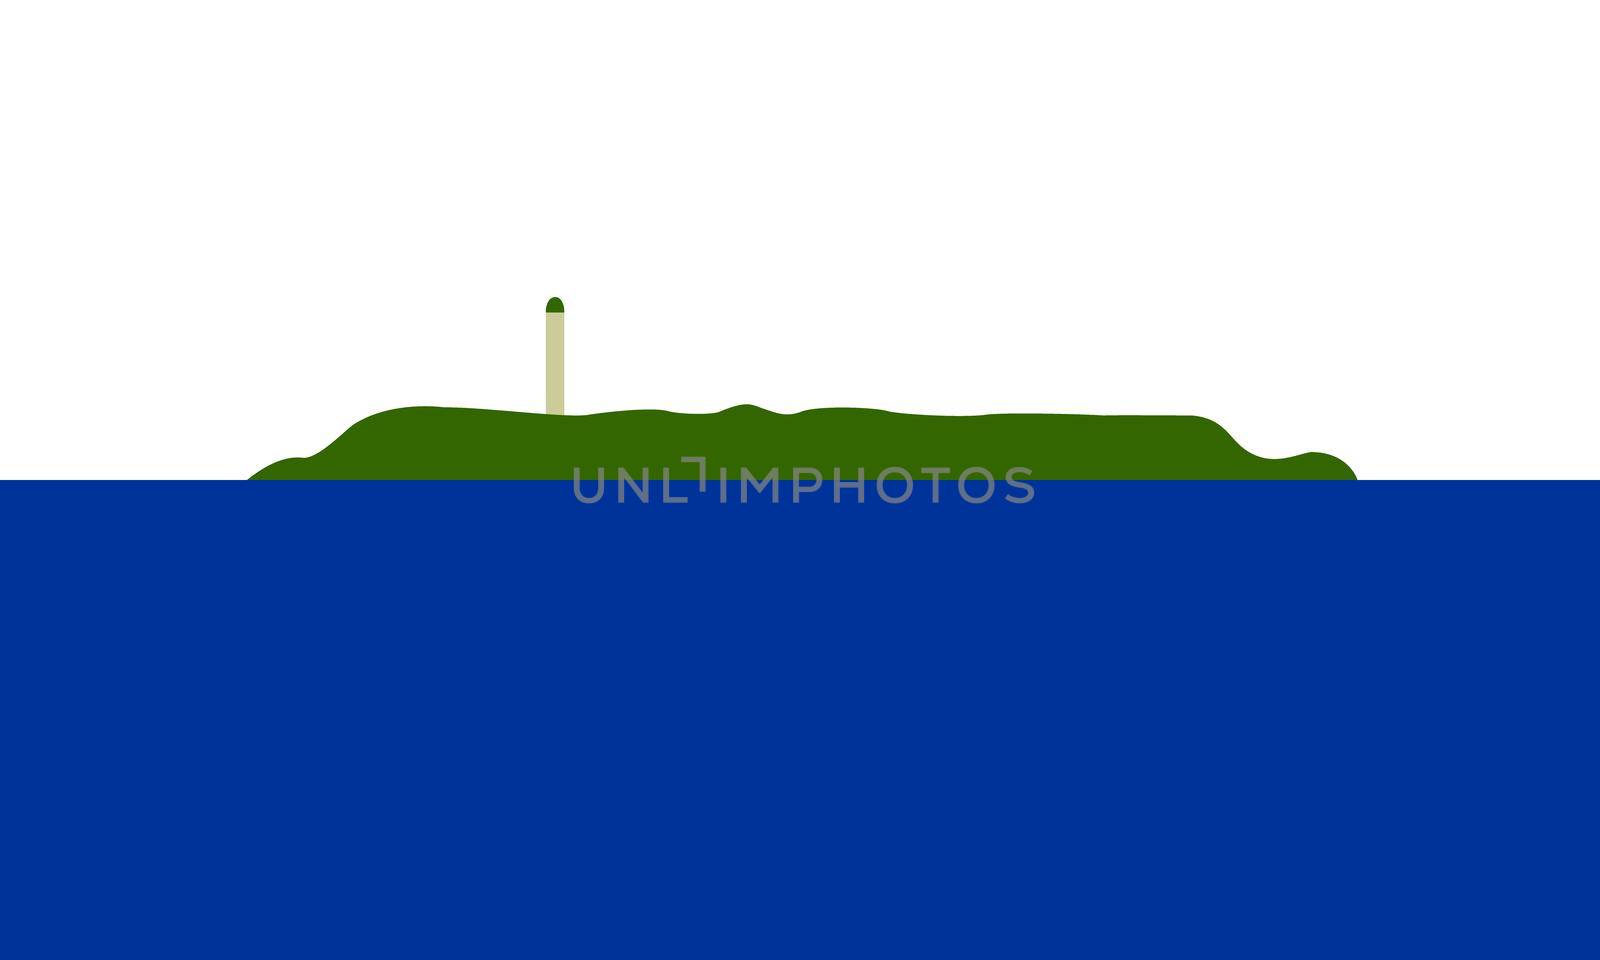 Navassa Island flag in real proportions and colors, vector by gladder